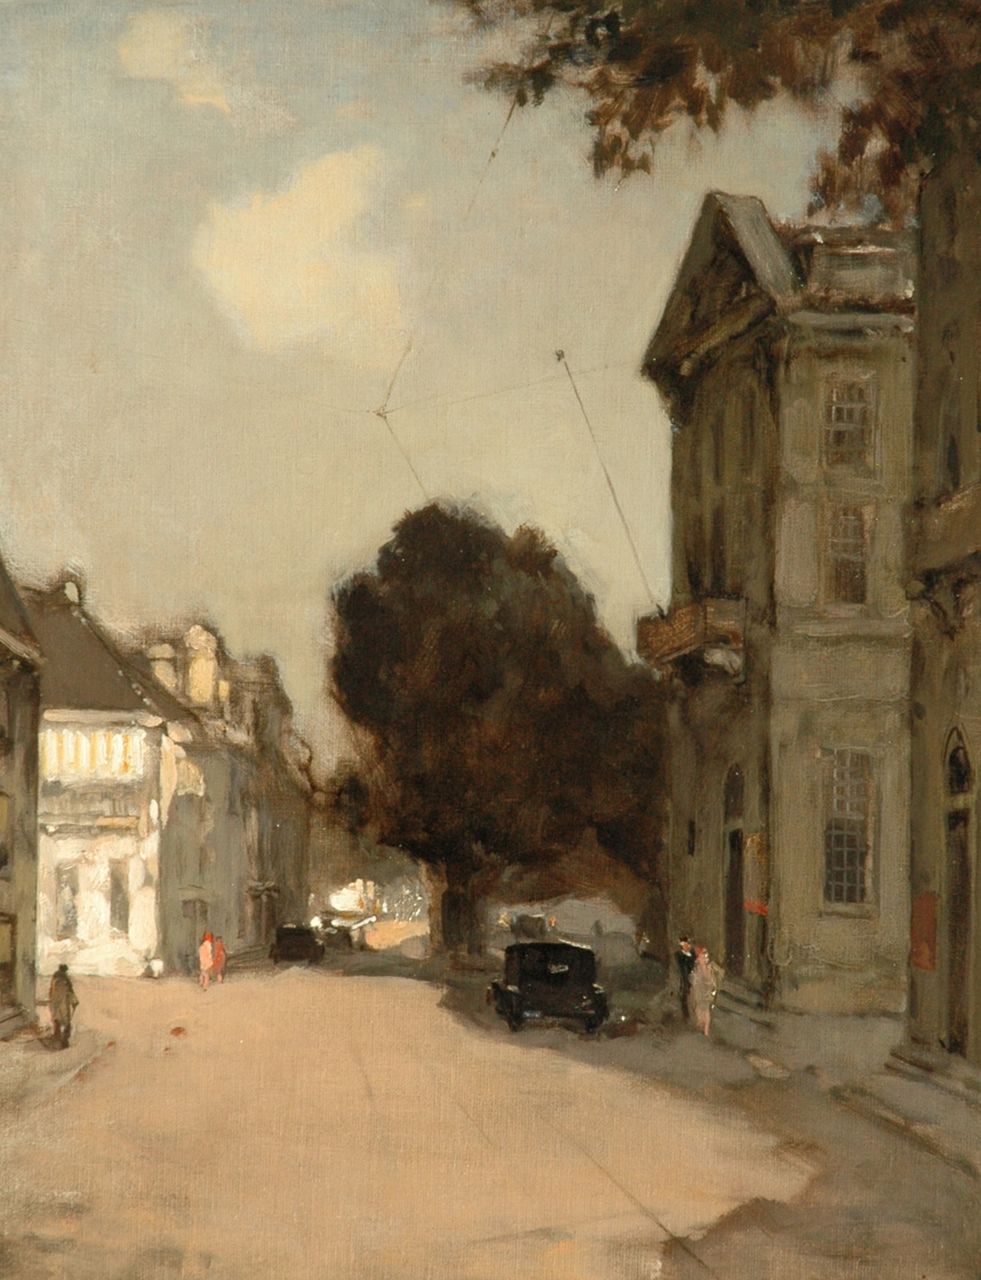 Wenning IJ.H.  | IJpe Heerke 'Ype' Wenning, The Korte Voorhout, The Hague, with the Royal Theatre, oil on canvas 50.5 x 40.5 cm, signed l.r.